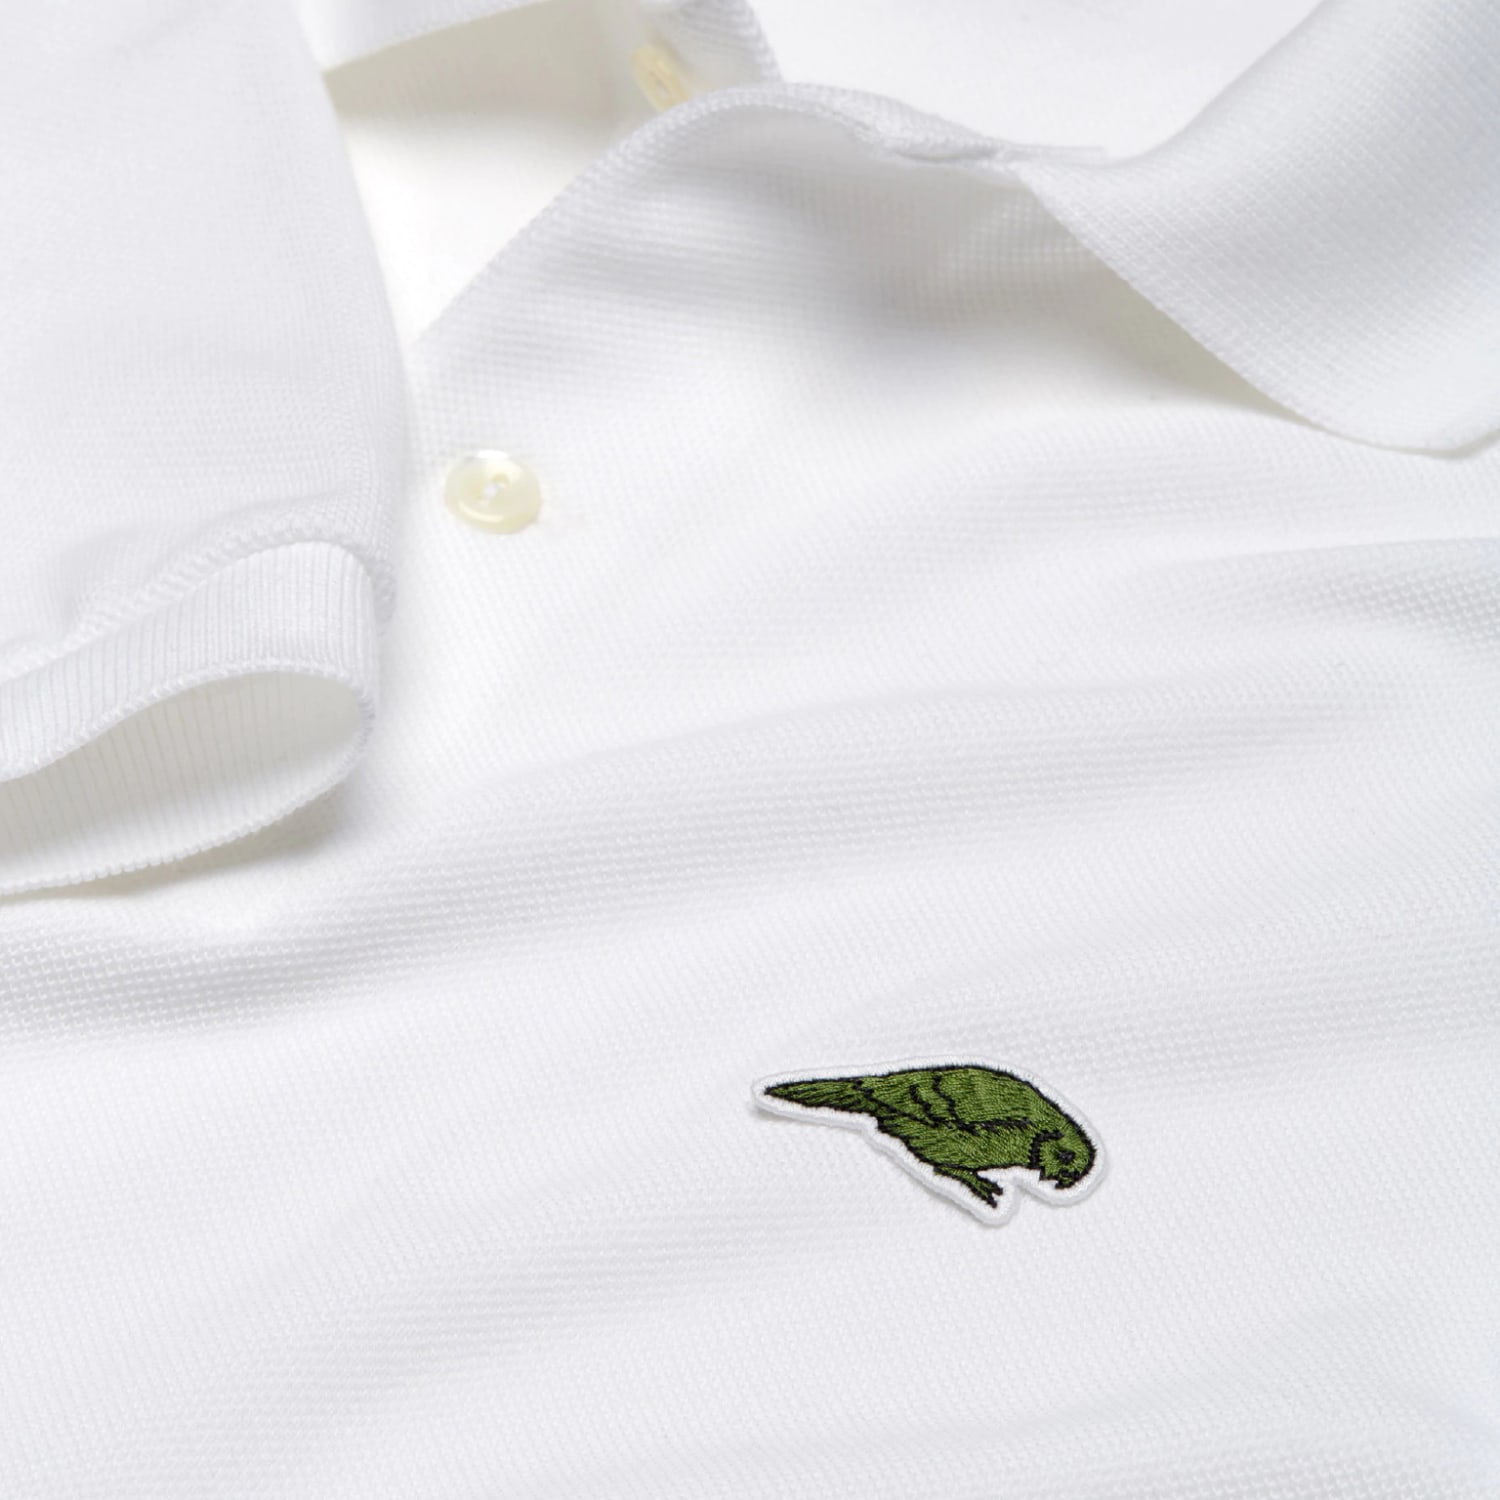 kedelig Støv Cruelty Lacoste replaces crocodile logo with endangered species